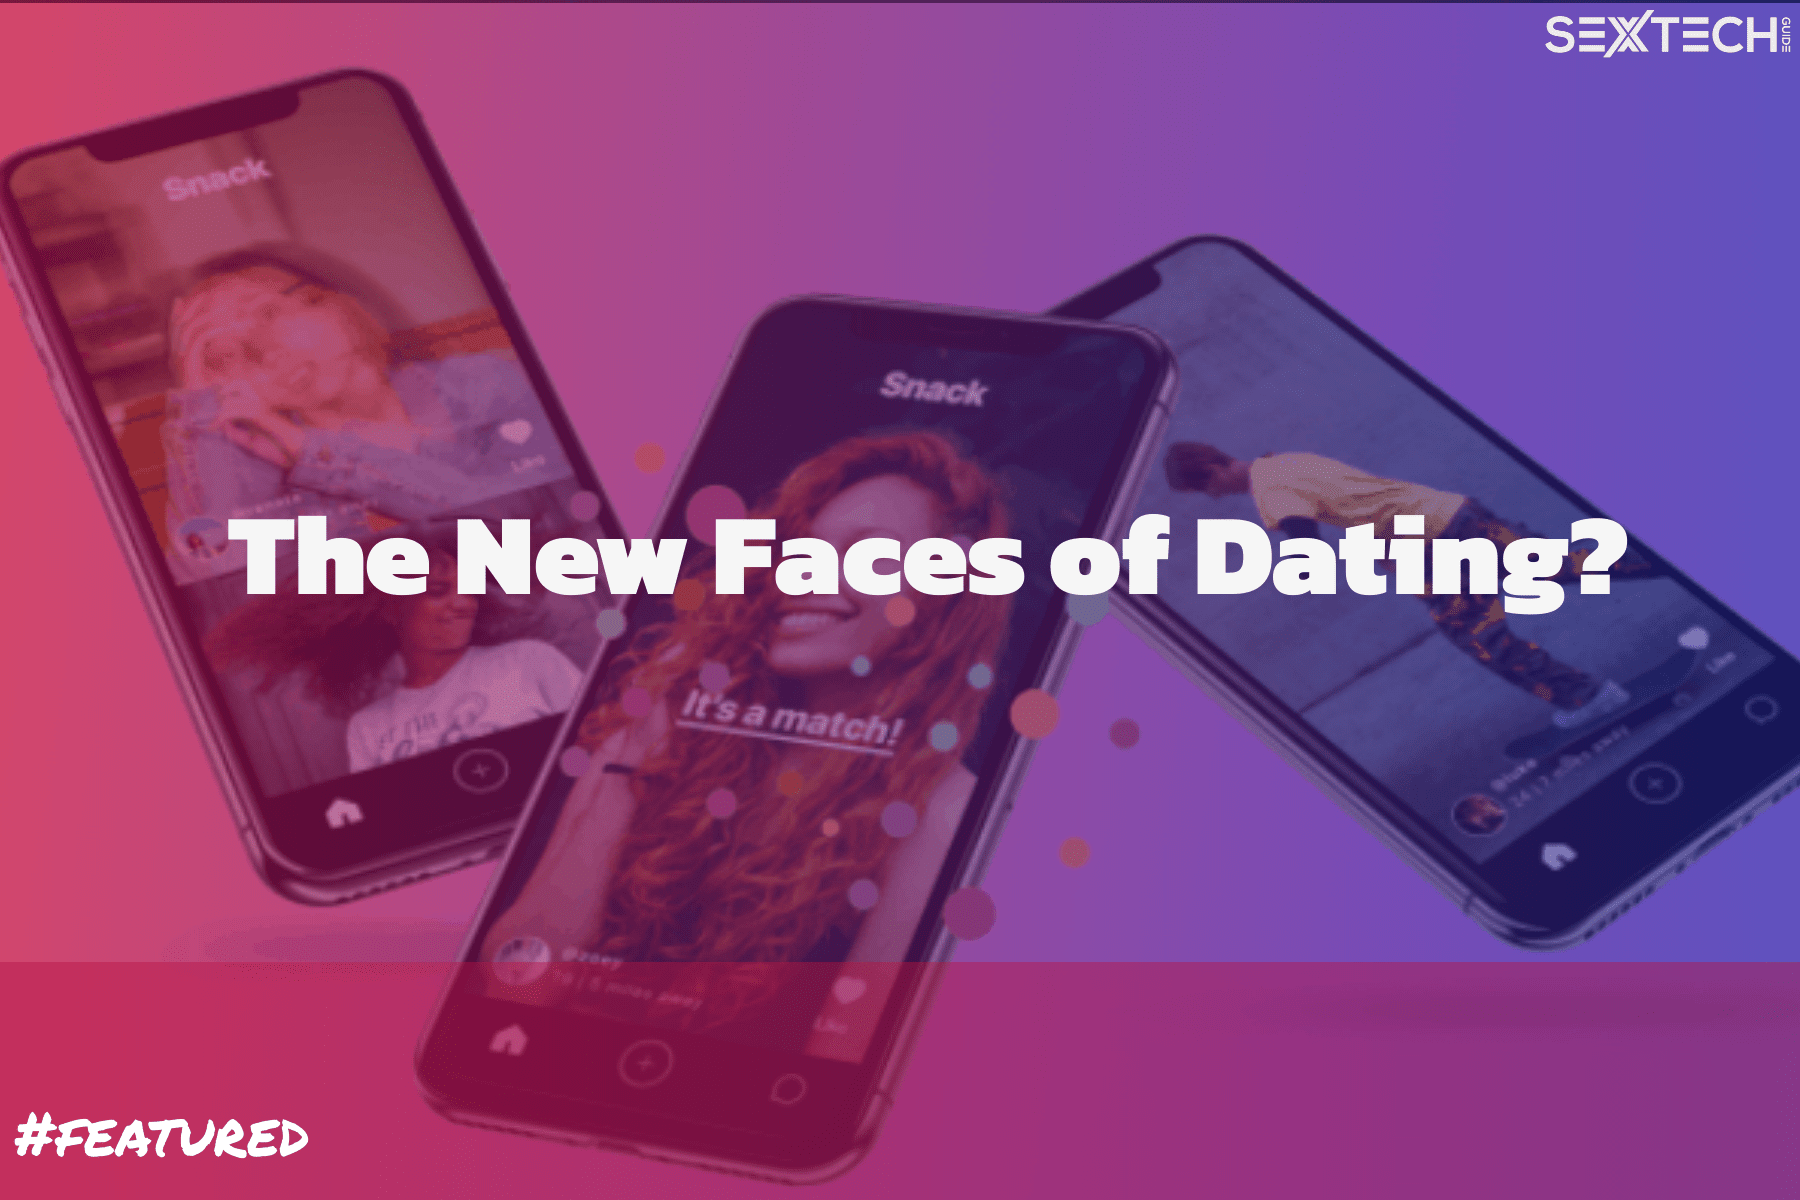 The Millenial Dating Apps Challenging Tinder, Bumble and Plenty of Fish